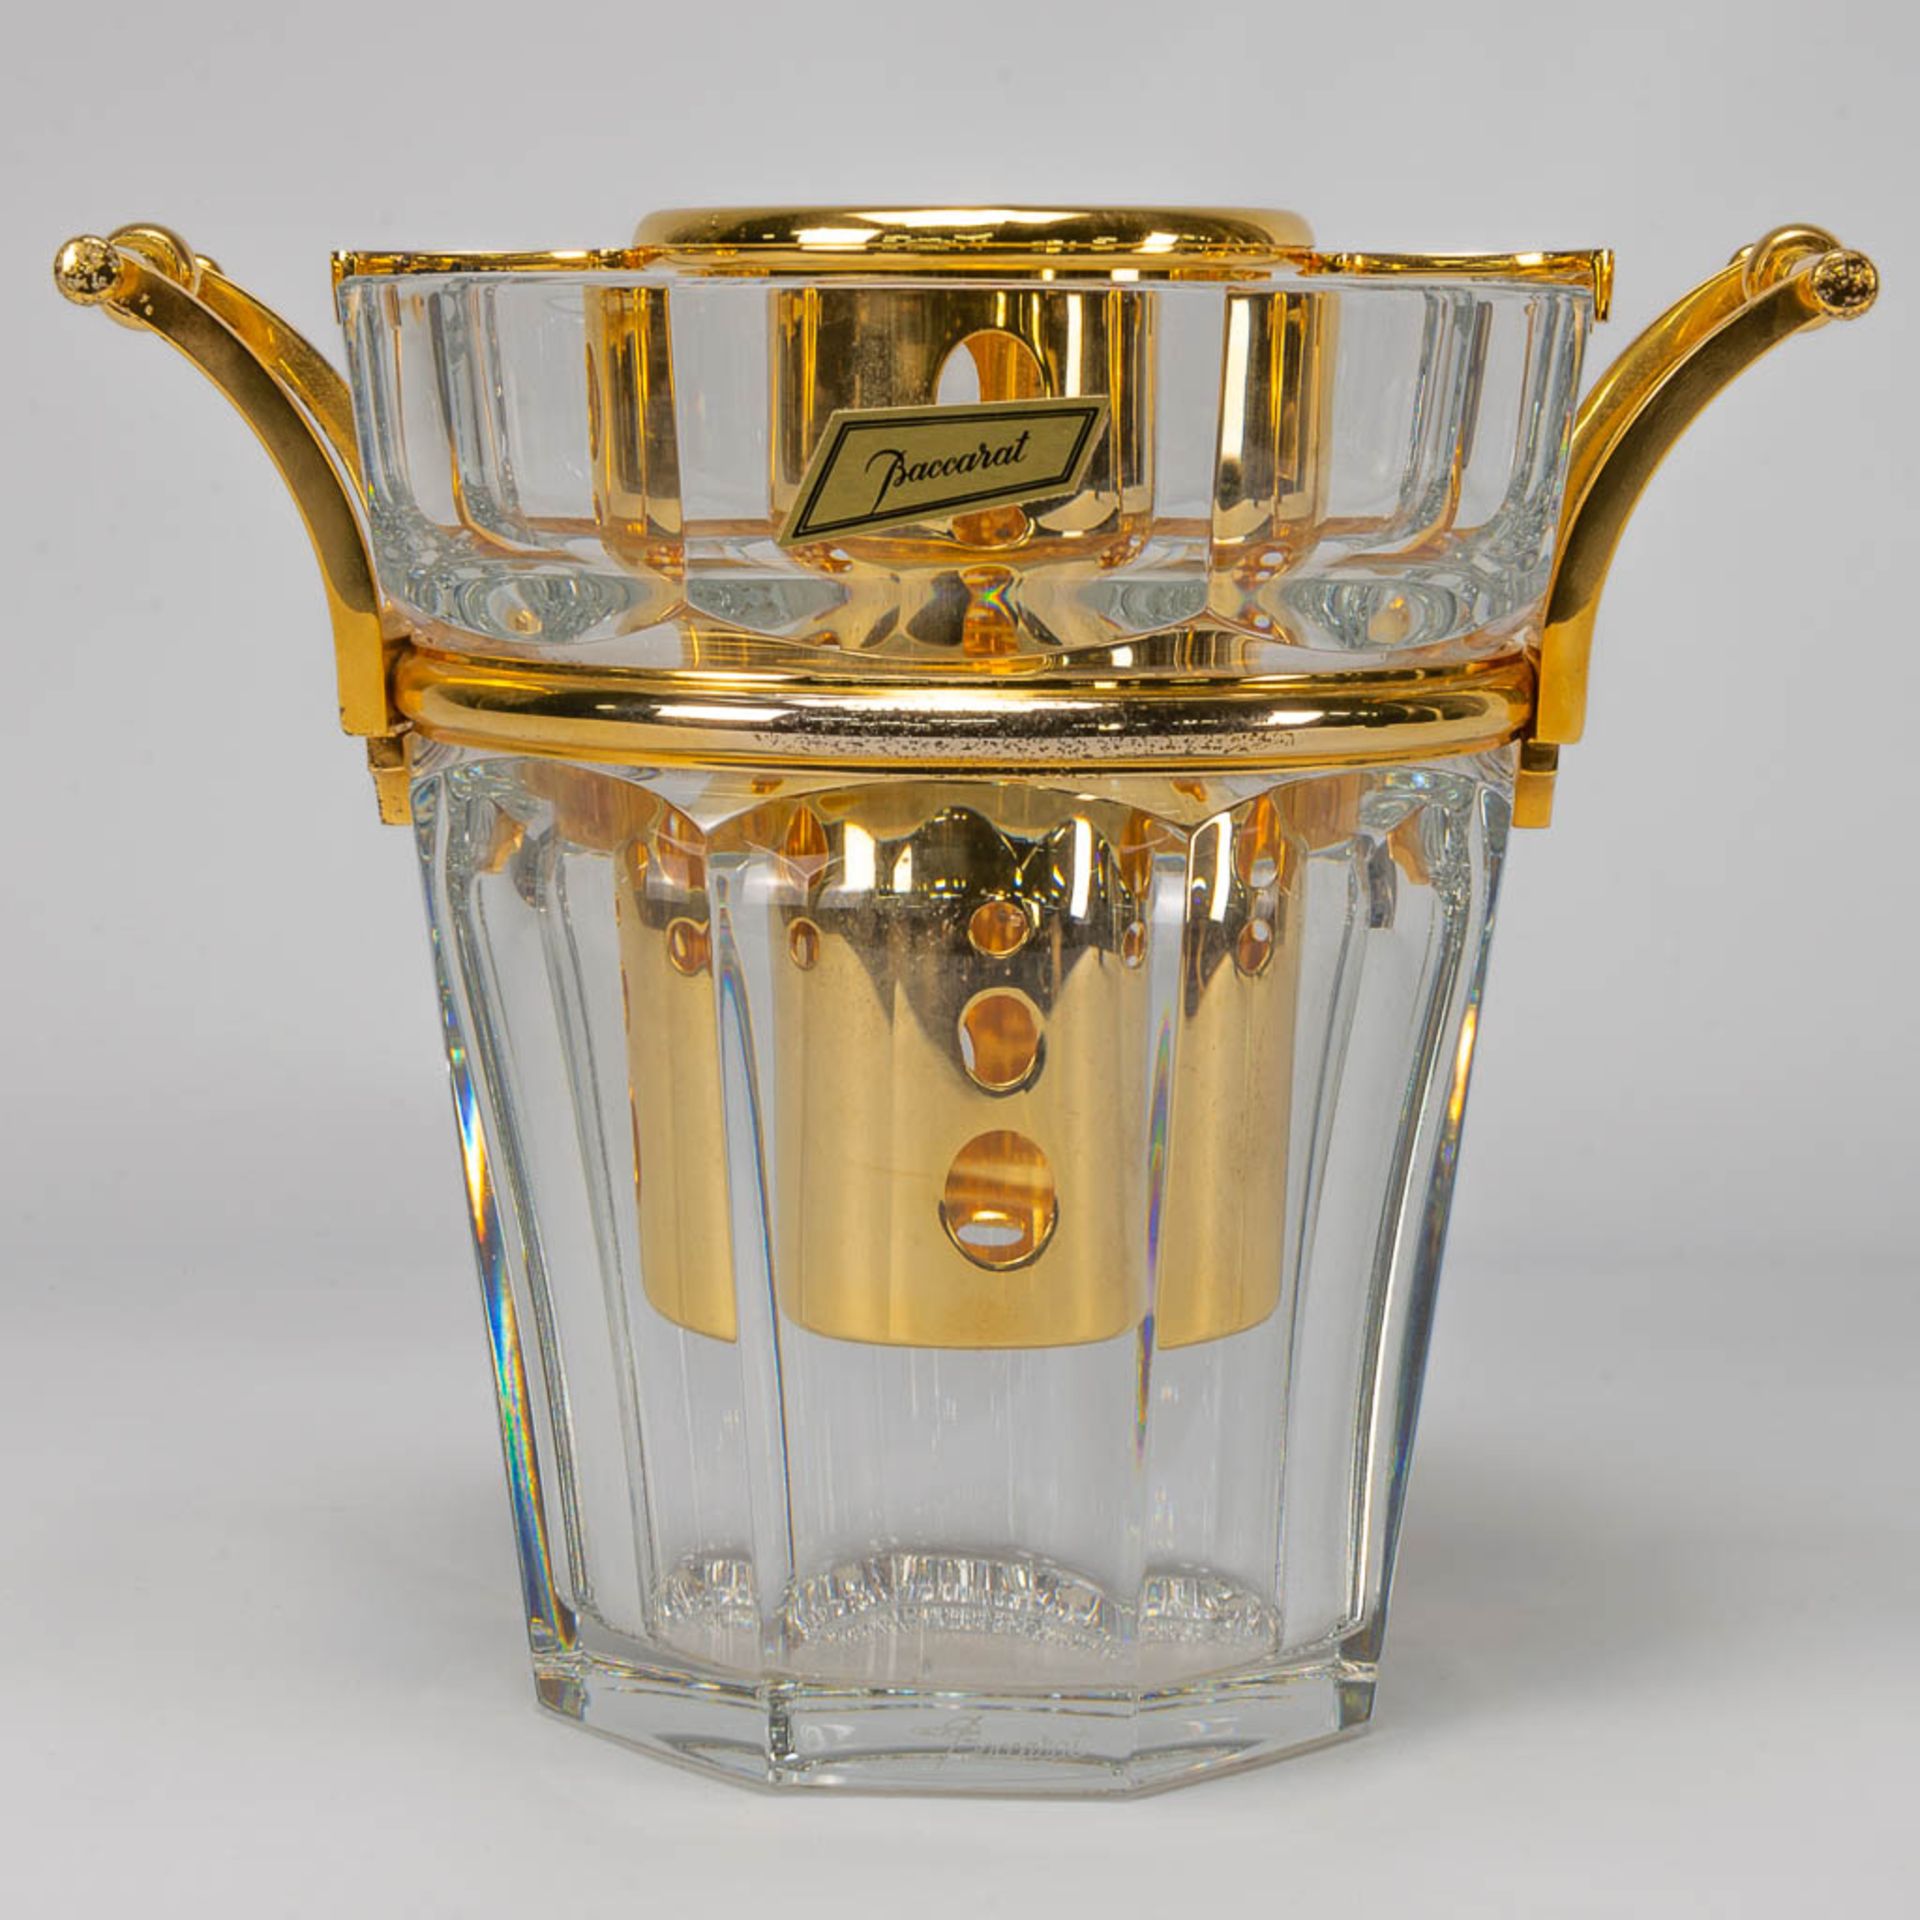 A Baccarat wine cooler or Champage bucket, made of Crystal with gold plated metal in the original bo - Image 9 of 12